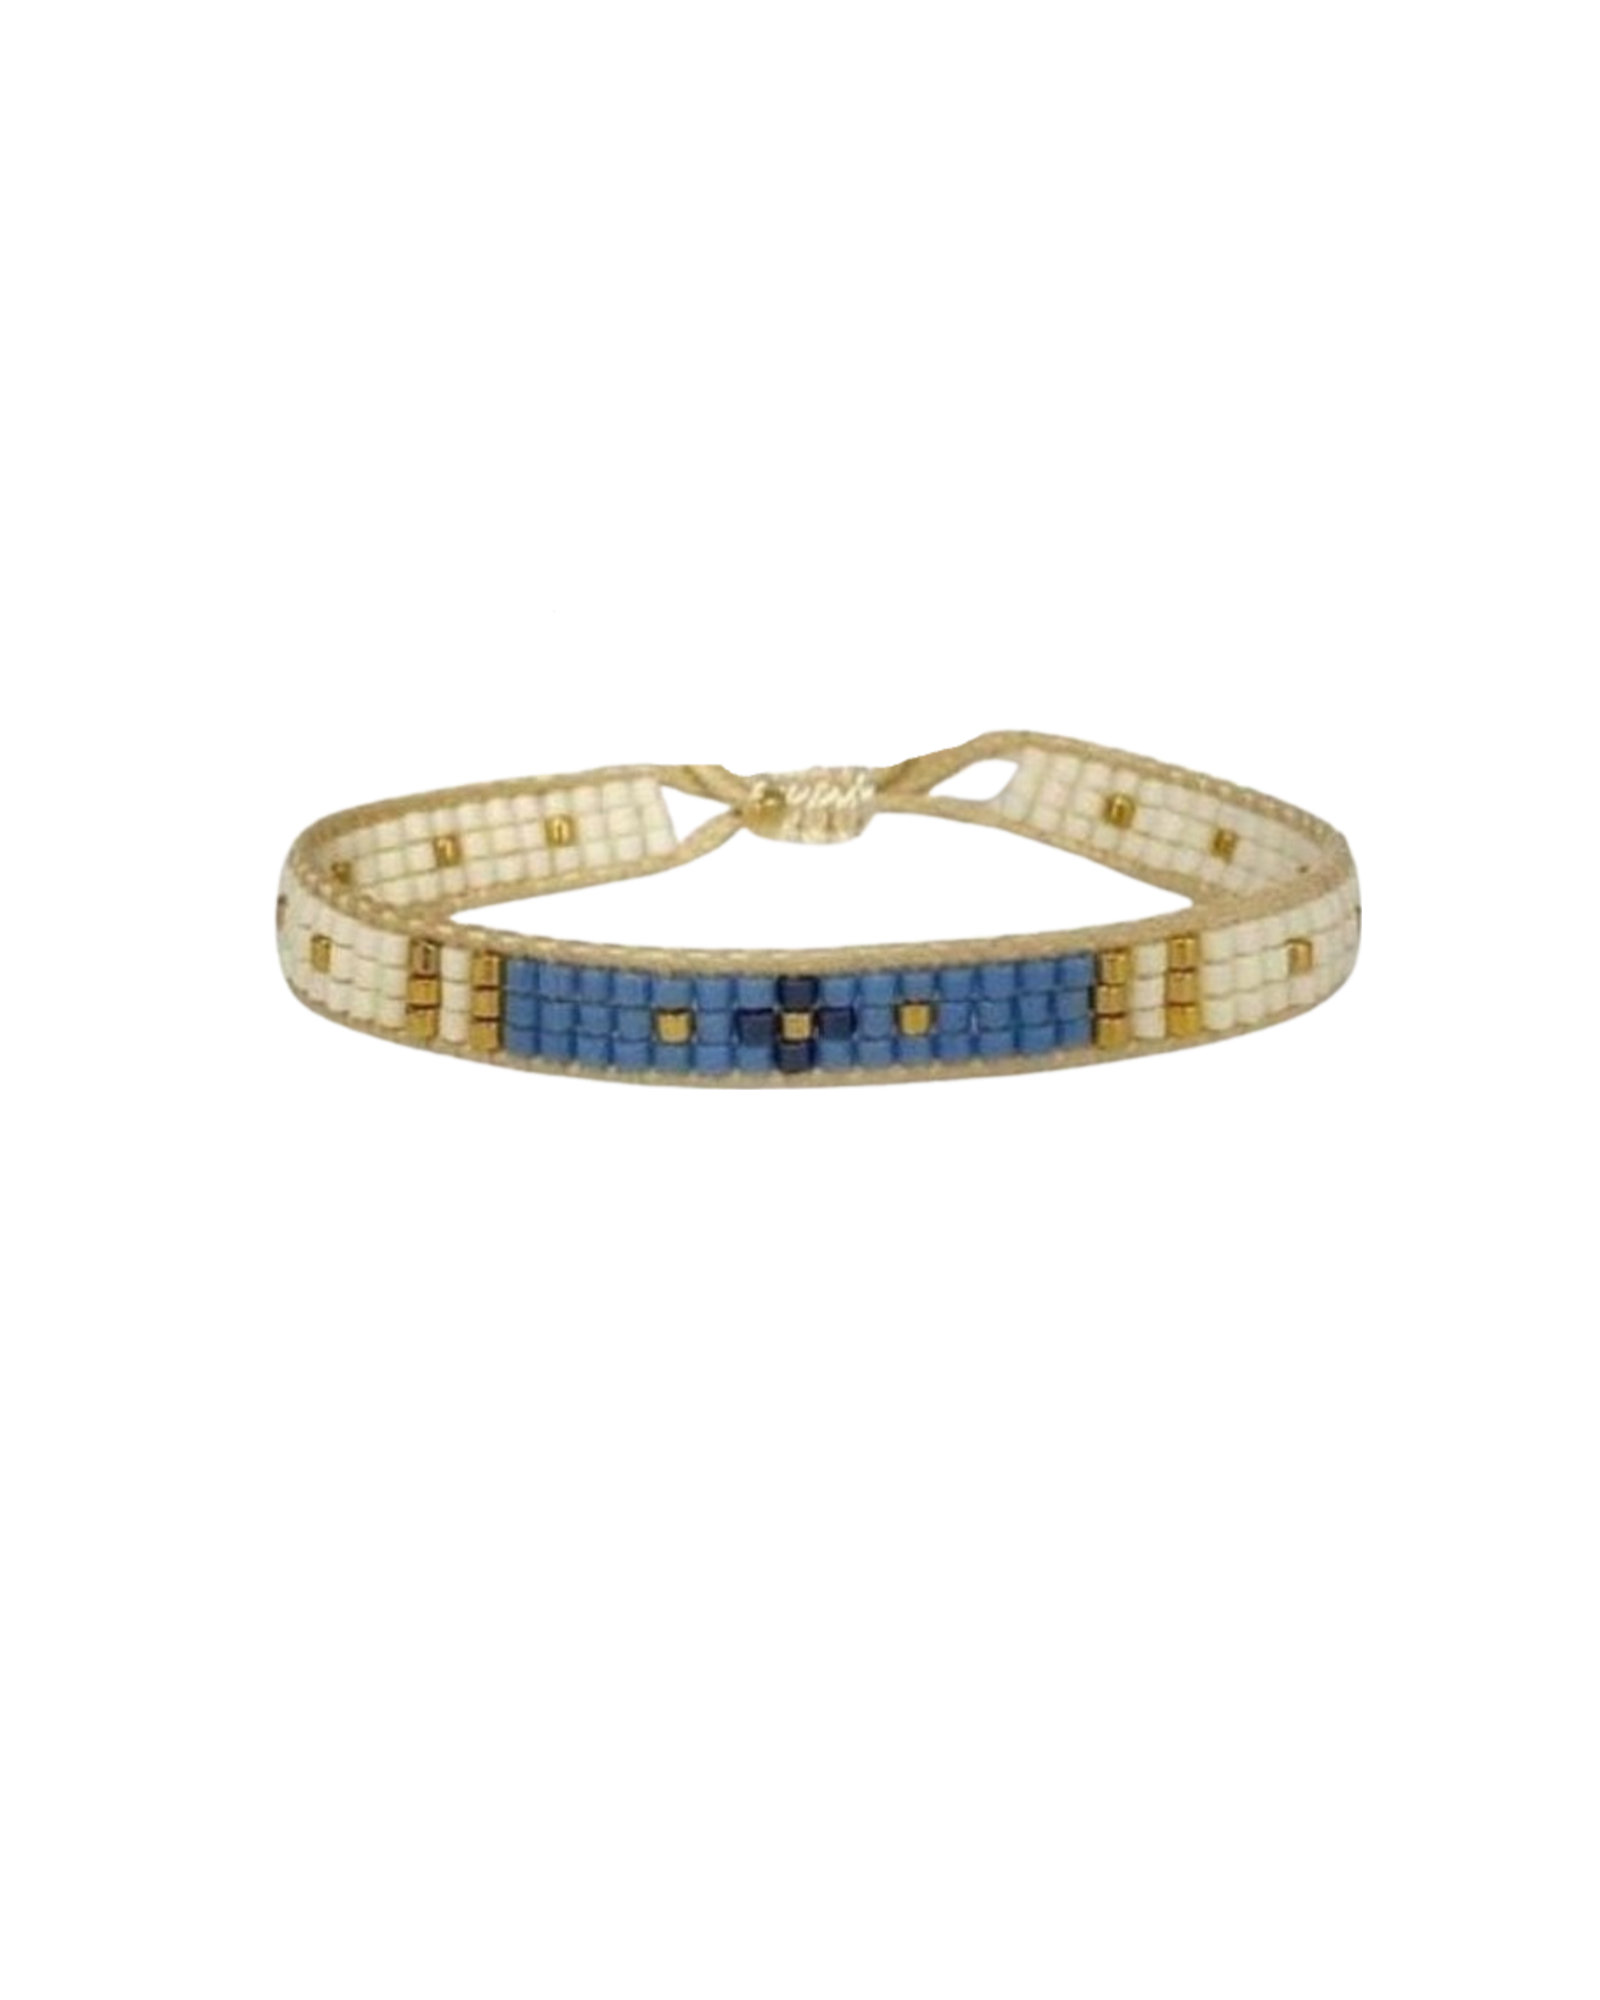 Ivory and blue mexican bracelets